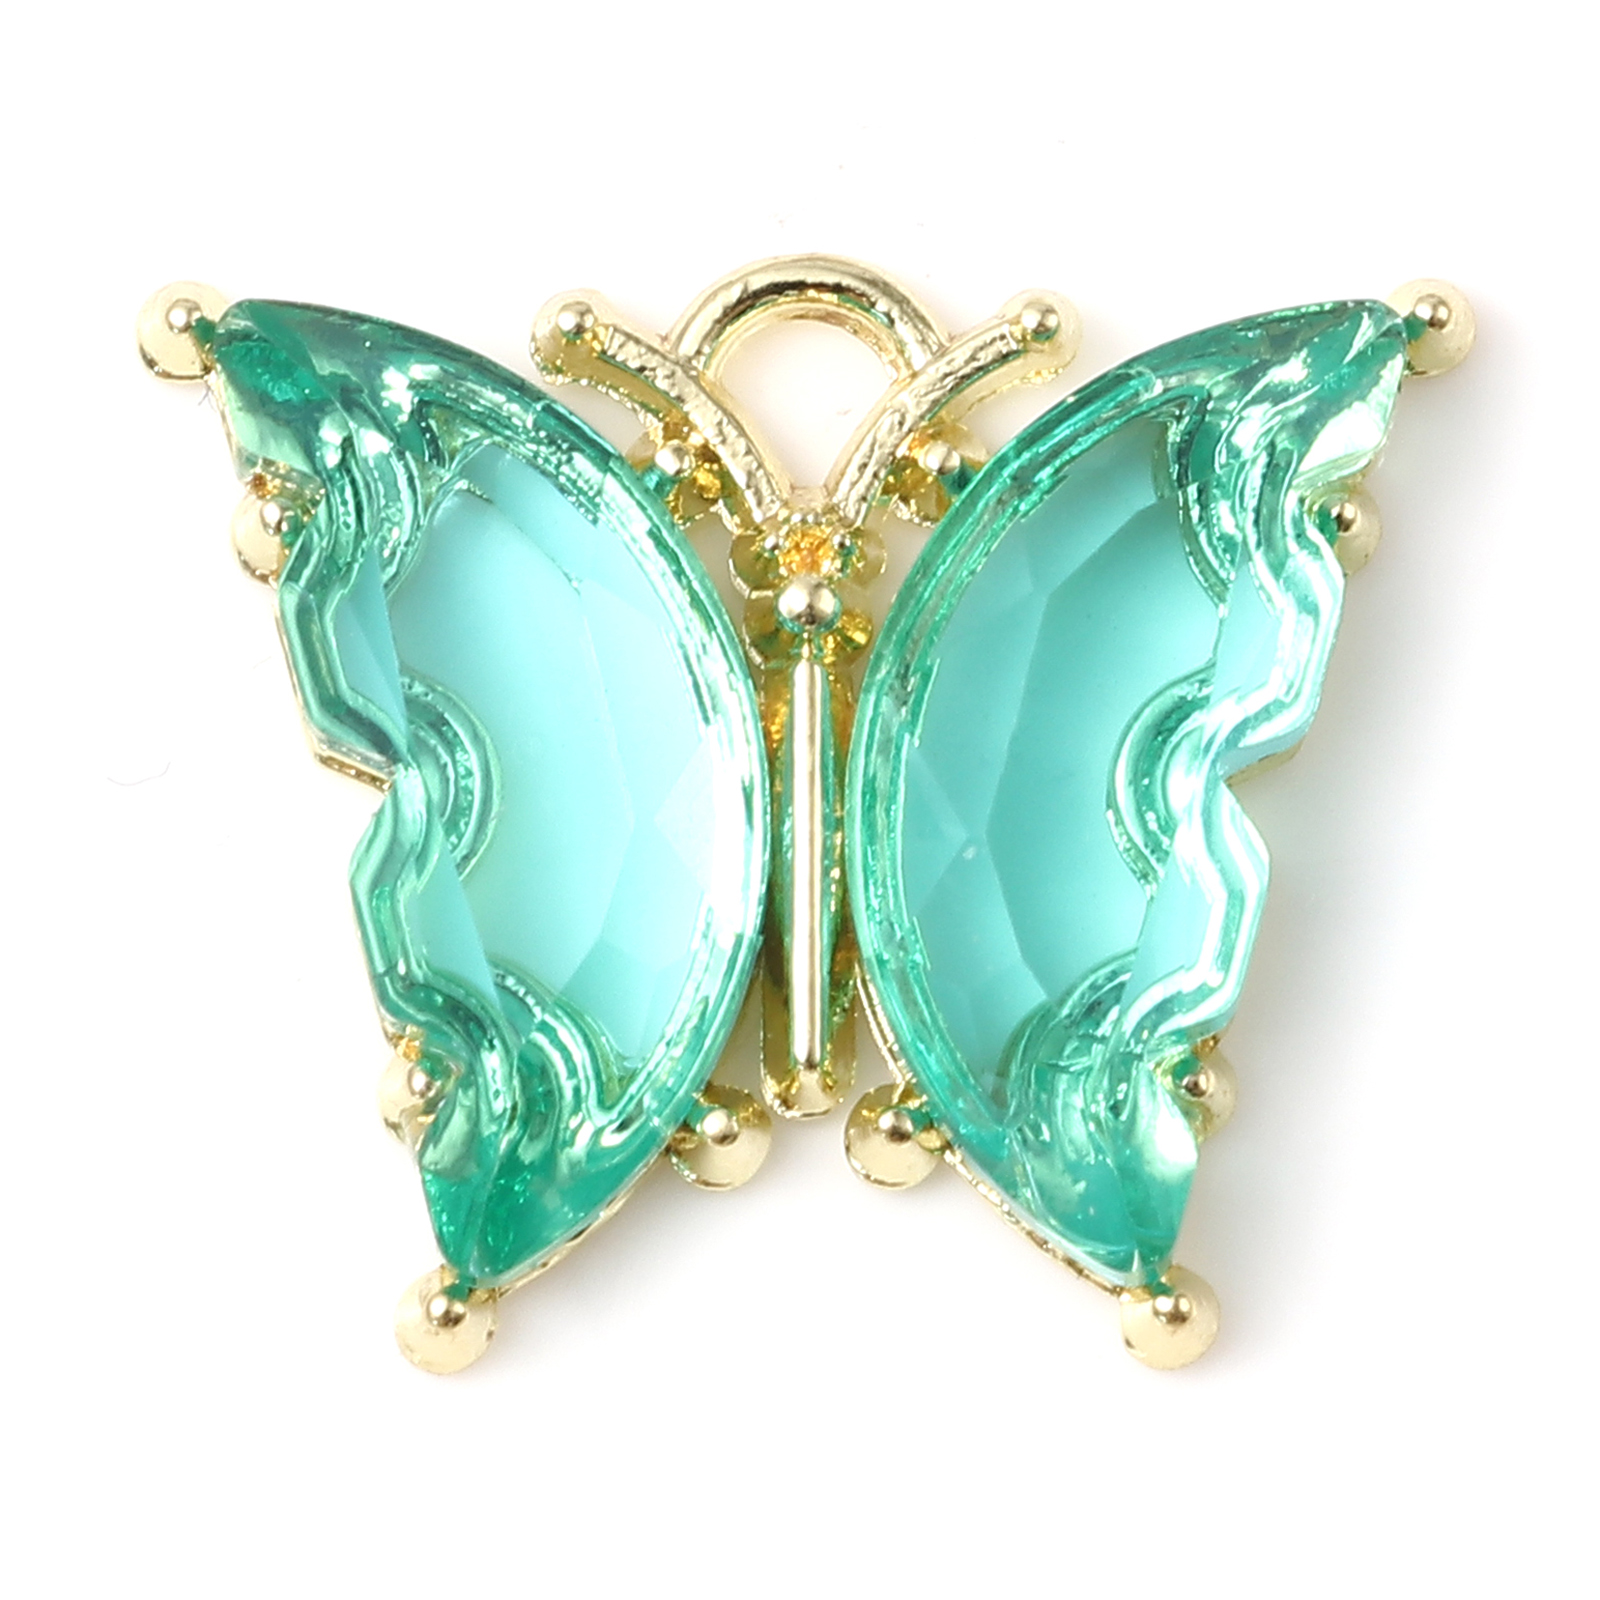 Picture of Zinc Based Alloy & Resin Insect Charms Butterfly Animal Gold Plated Green 23mm x 19mm - 22mm x 19mm, 10 PCs